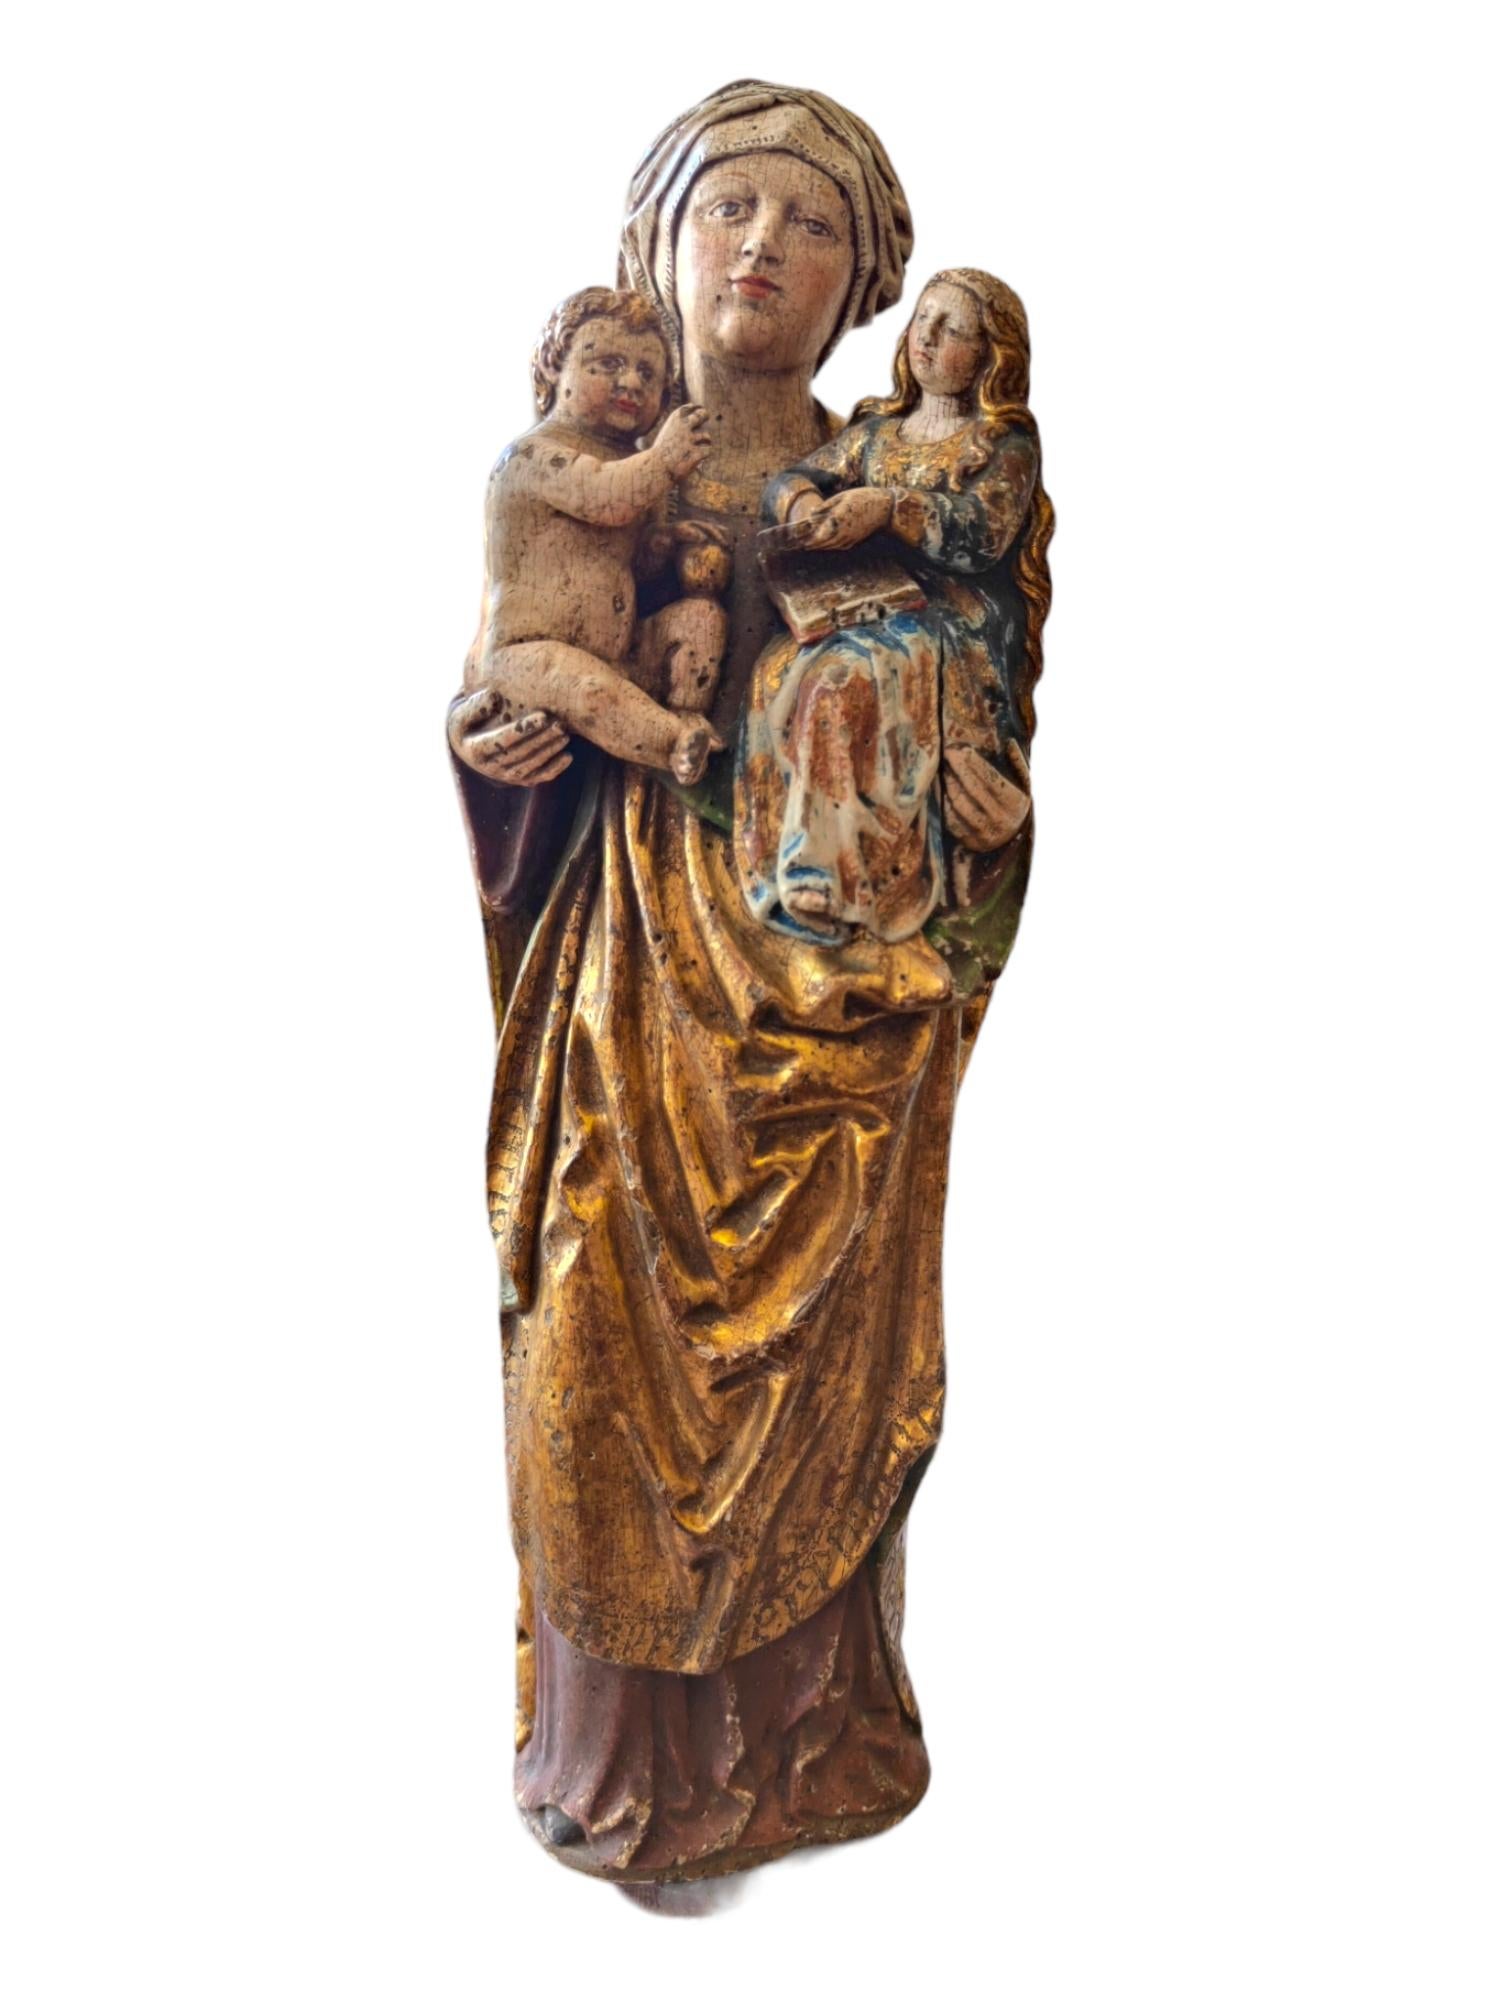 15th century Gothic Virgin
Gothic Virgin of the 15th century Virgin in carved and polychrome wood of the 15th century. In its original state, museum object. Measures 40 cm high, only the sculpture.